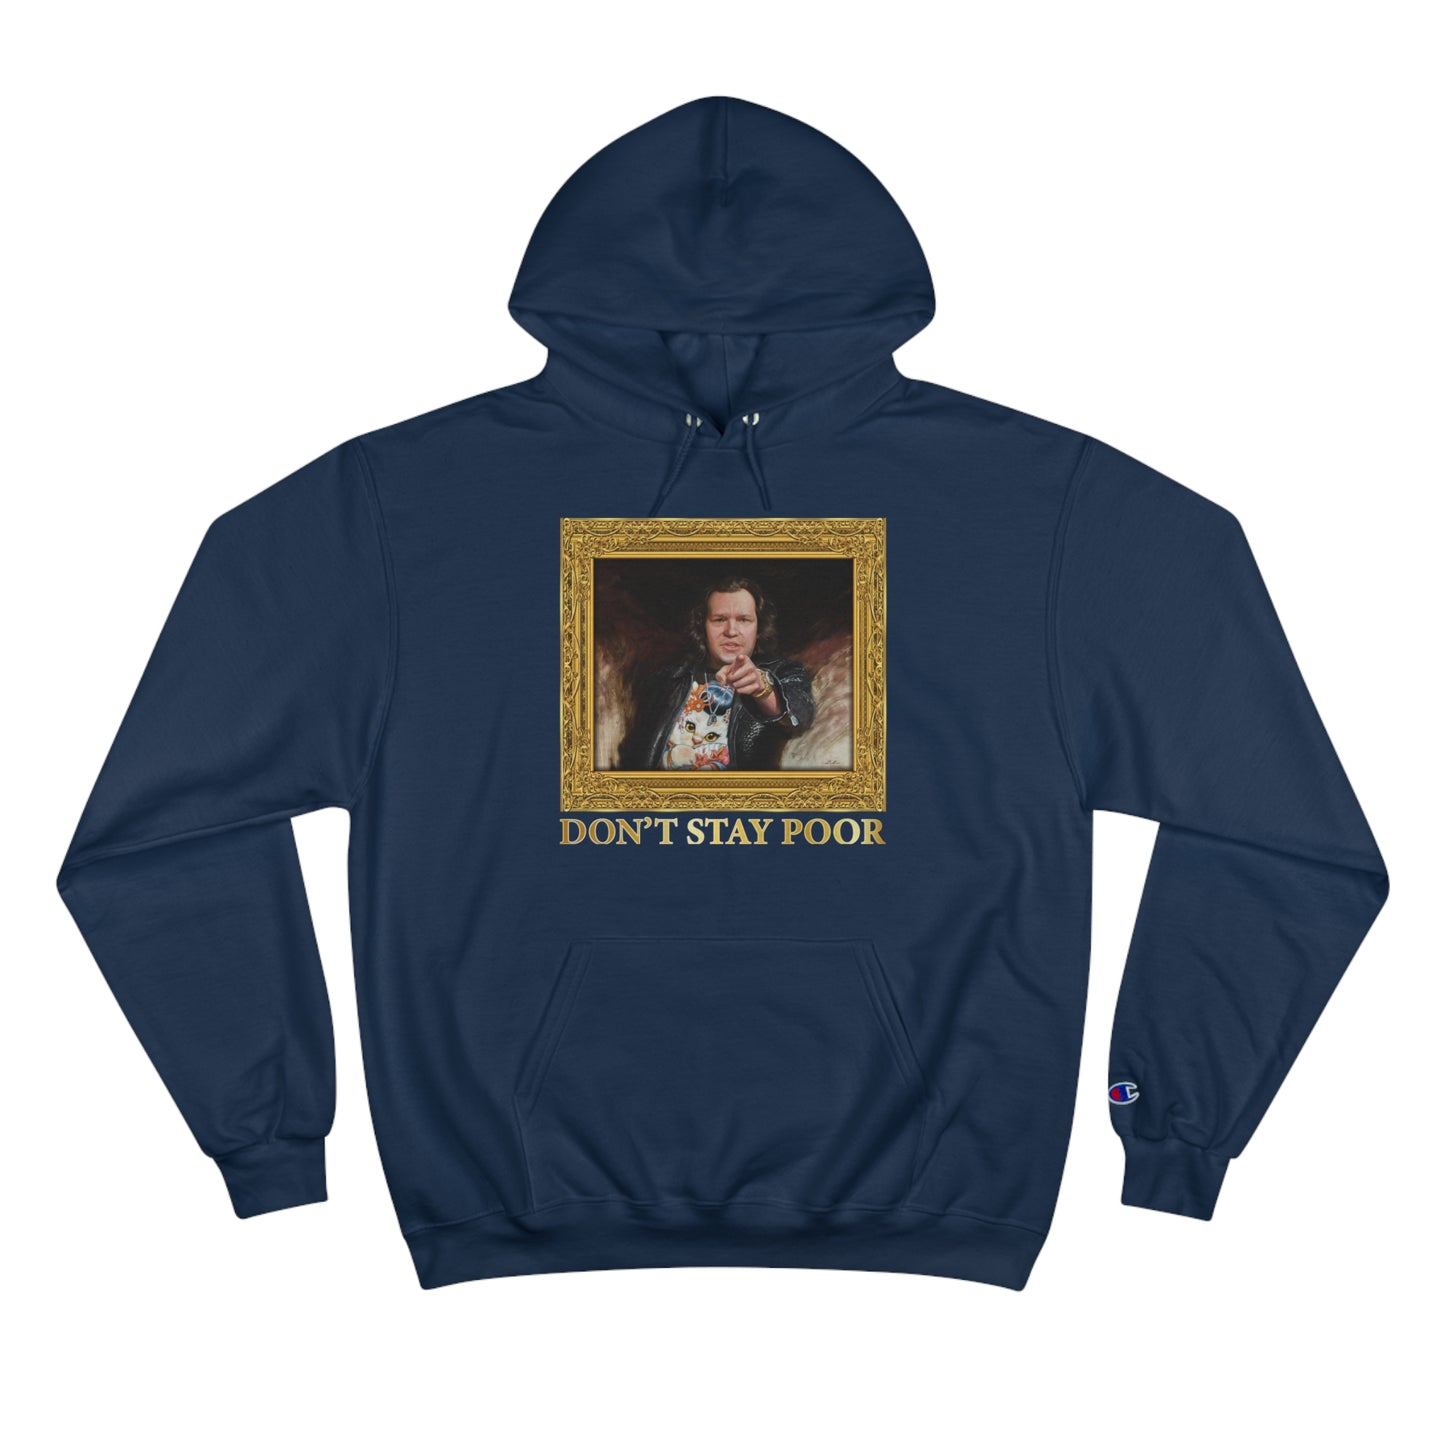 Champion Hoodie - Don't Stay Poor Painting